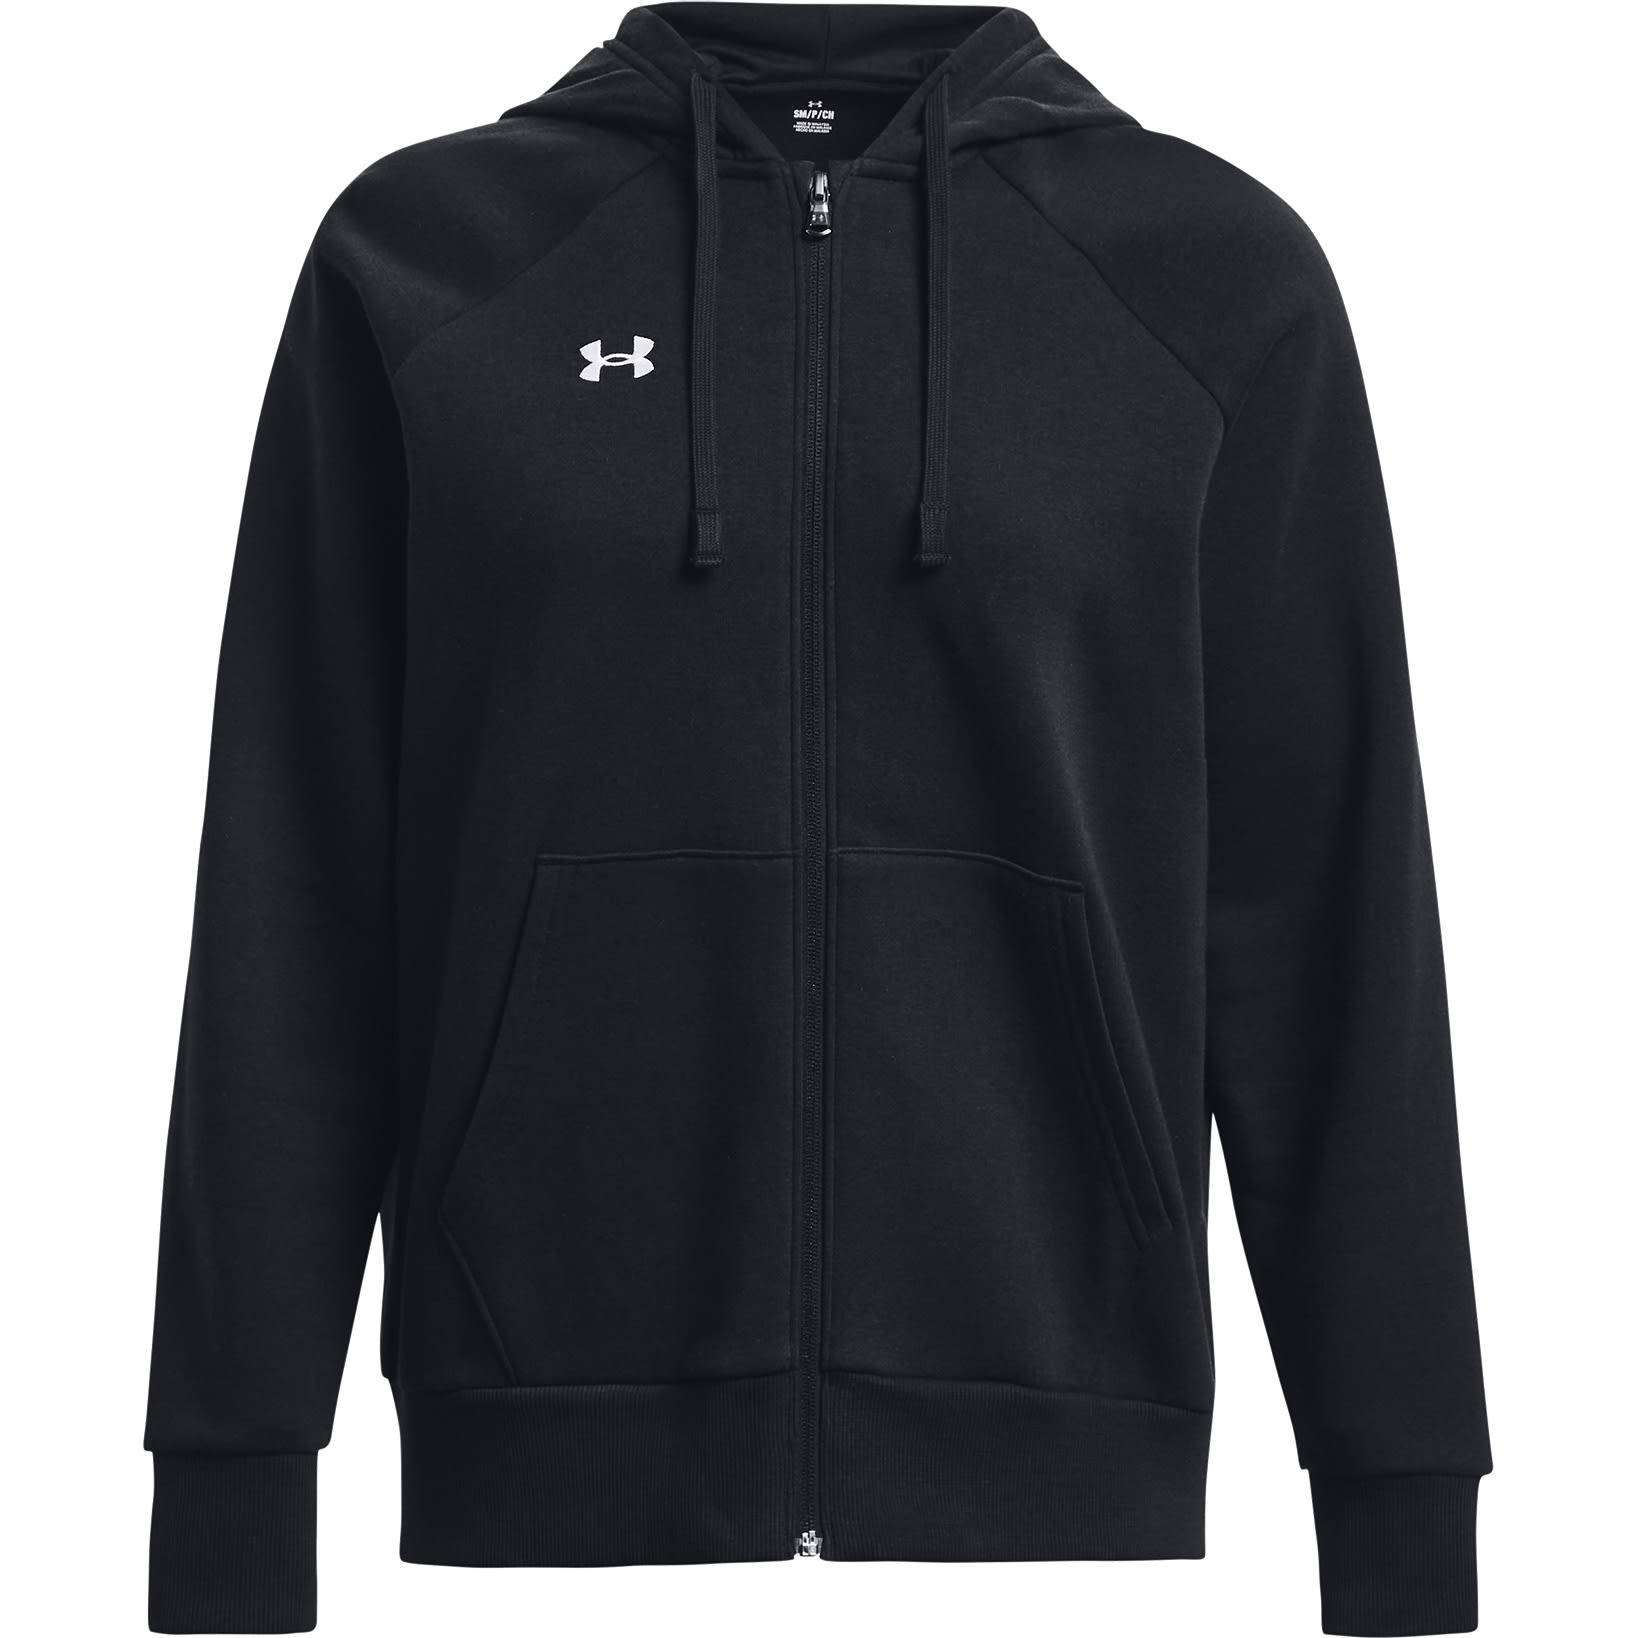 Women's Under Armour Hoodies  Free Curbside Pickup at DICK'S